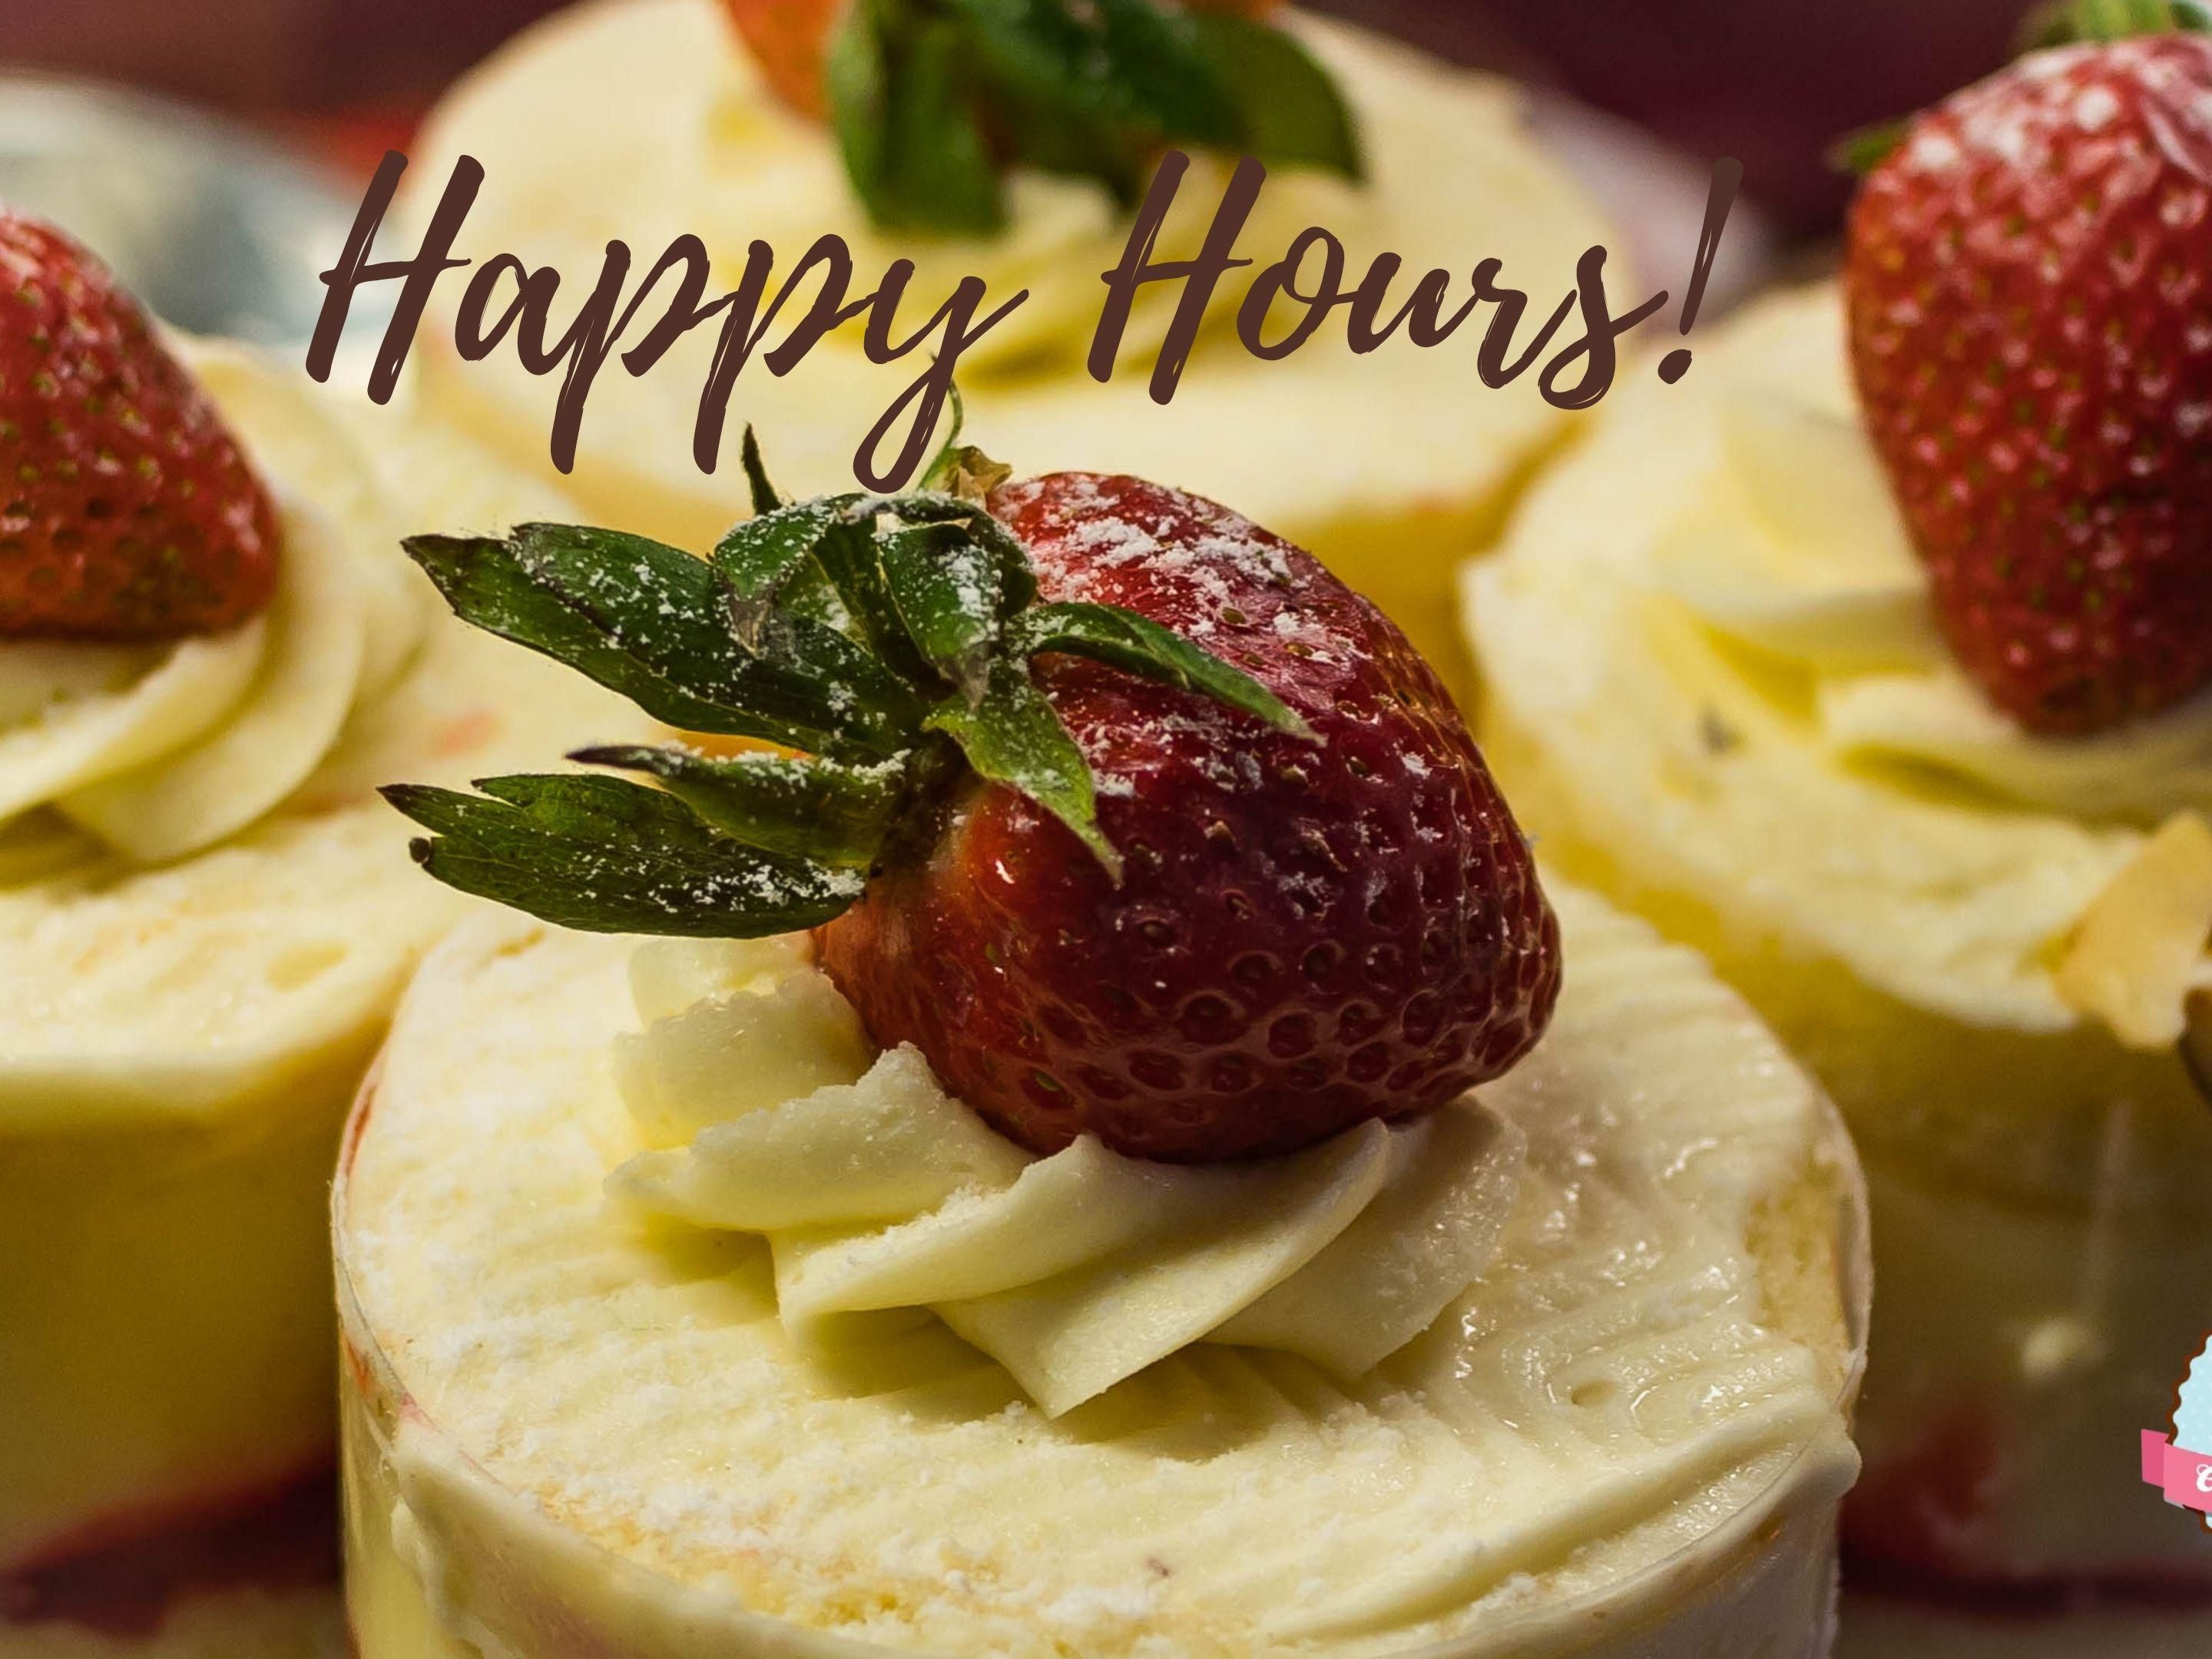 Happy Hours at Deli Cakes & Bakes